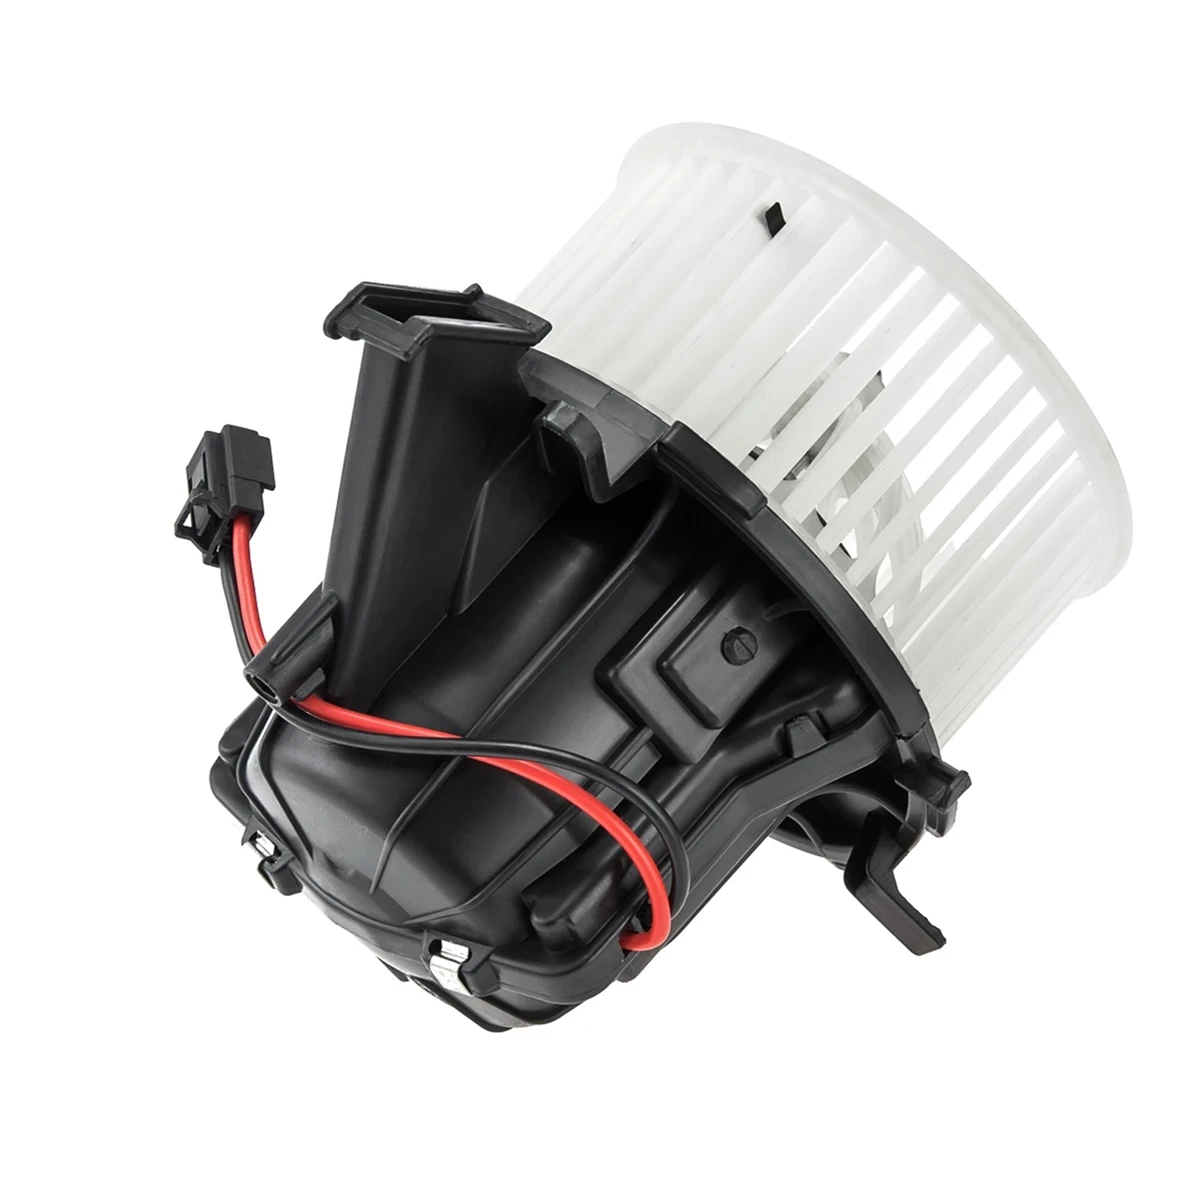 

8T1820021 HVAC Blower Motor Assembly for Audi A4 A5 Q3 Q5 S4 S5 RS5 2012-2017 8T1 820 021 Heater Blower Motor Fan Motor